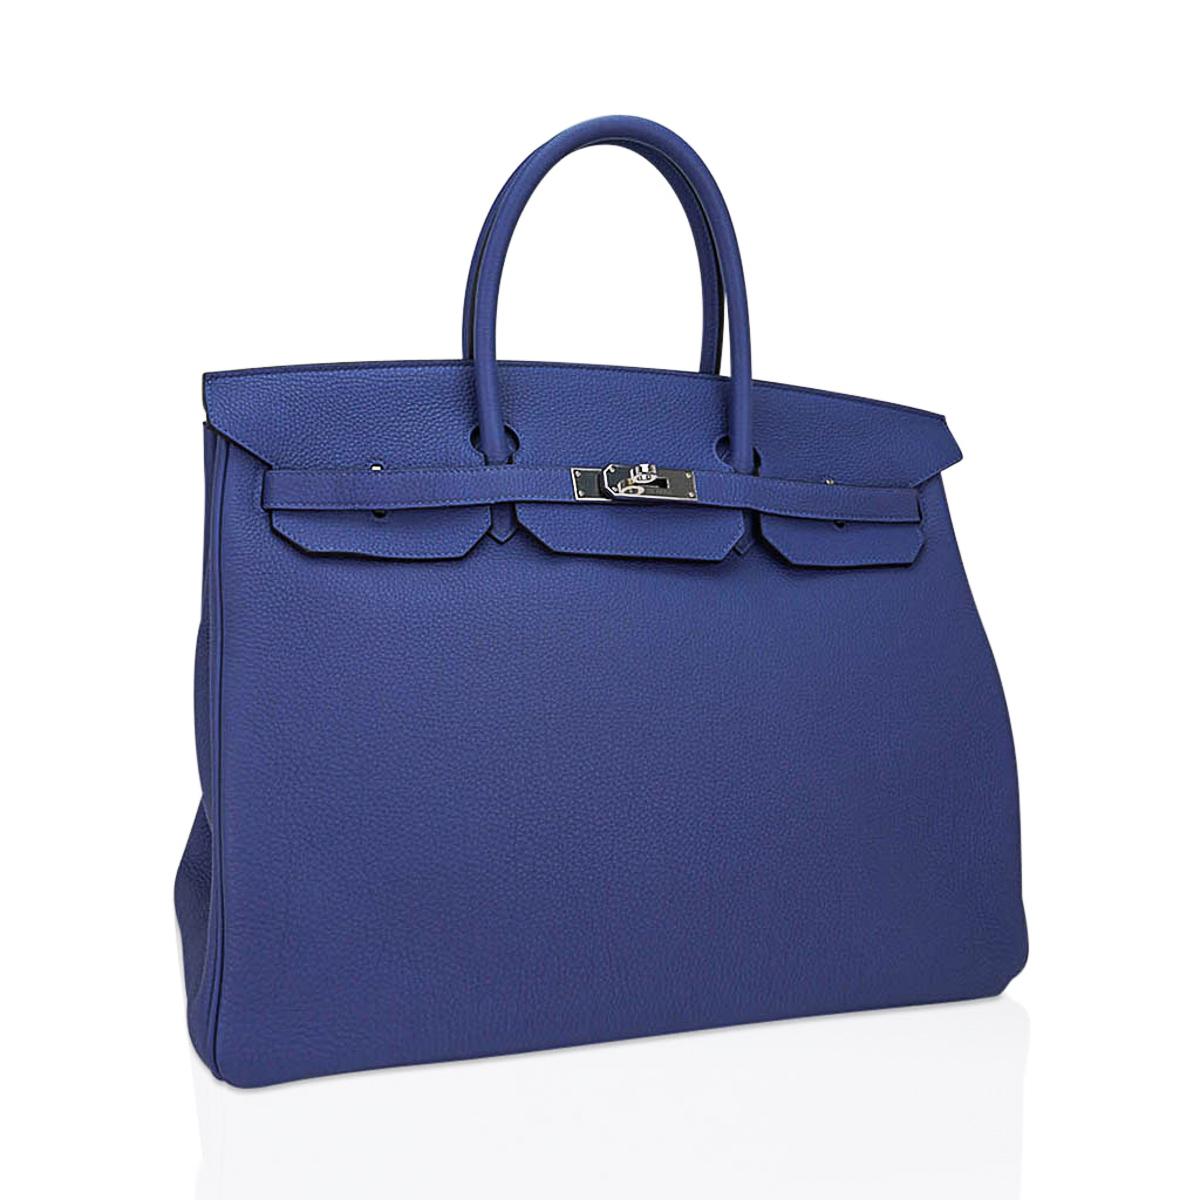 Mightychic offers a limited edition Hermes Birkin 40 bag featured in Bleu de Prusse.
Hermes leather in soft Togo is supple and scratch resistant.
Crisp with palladium hardware.
This beautiful neutral blue Birkin bag is a classic addition to any